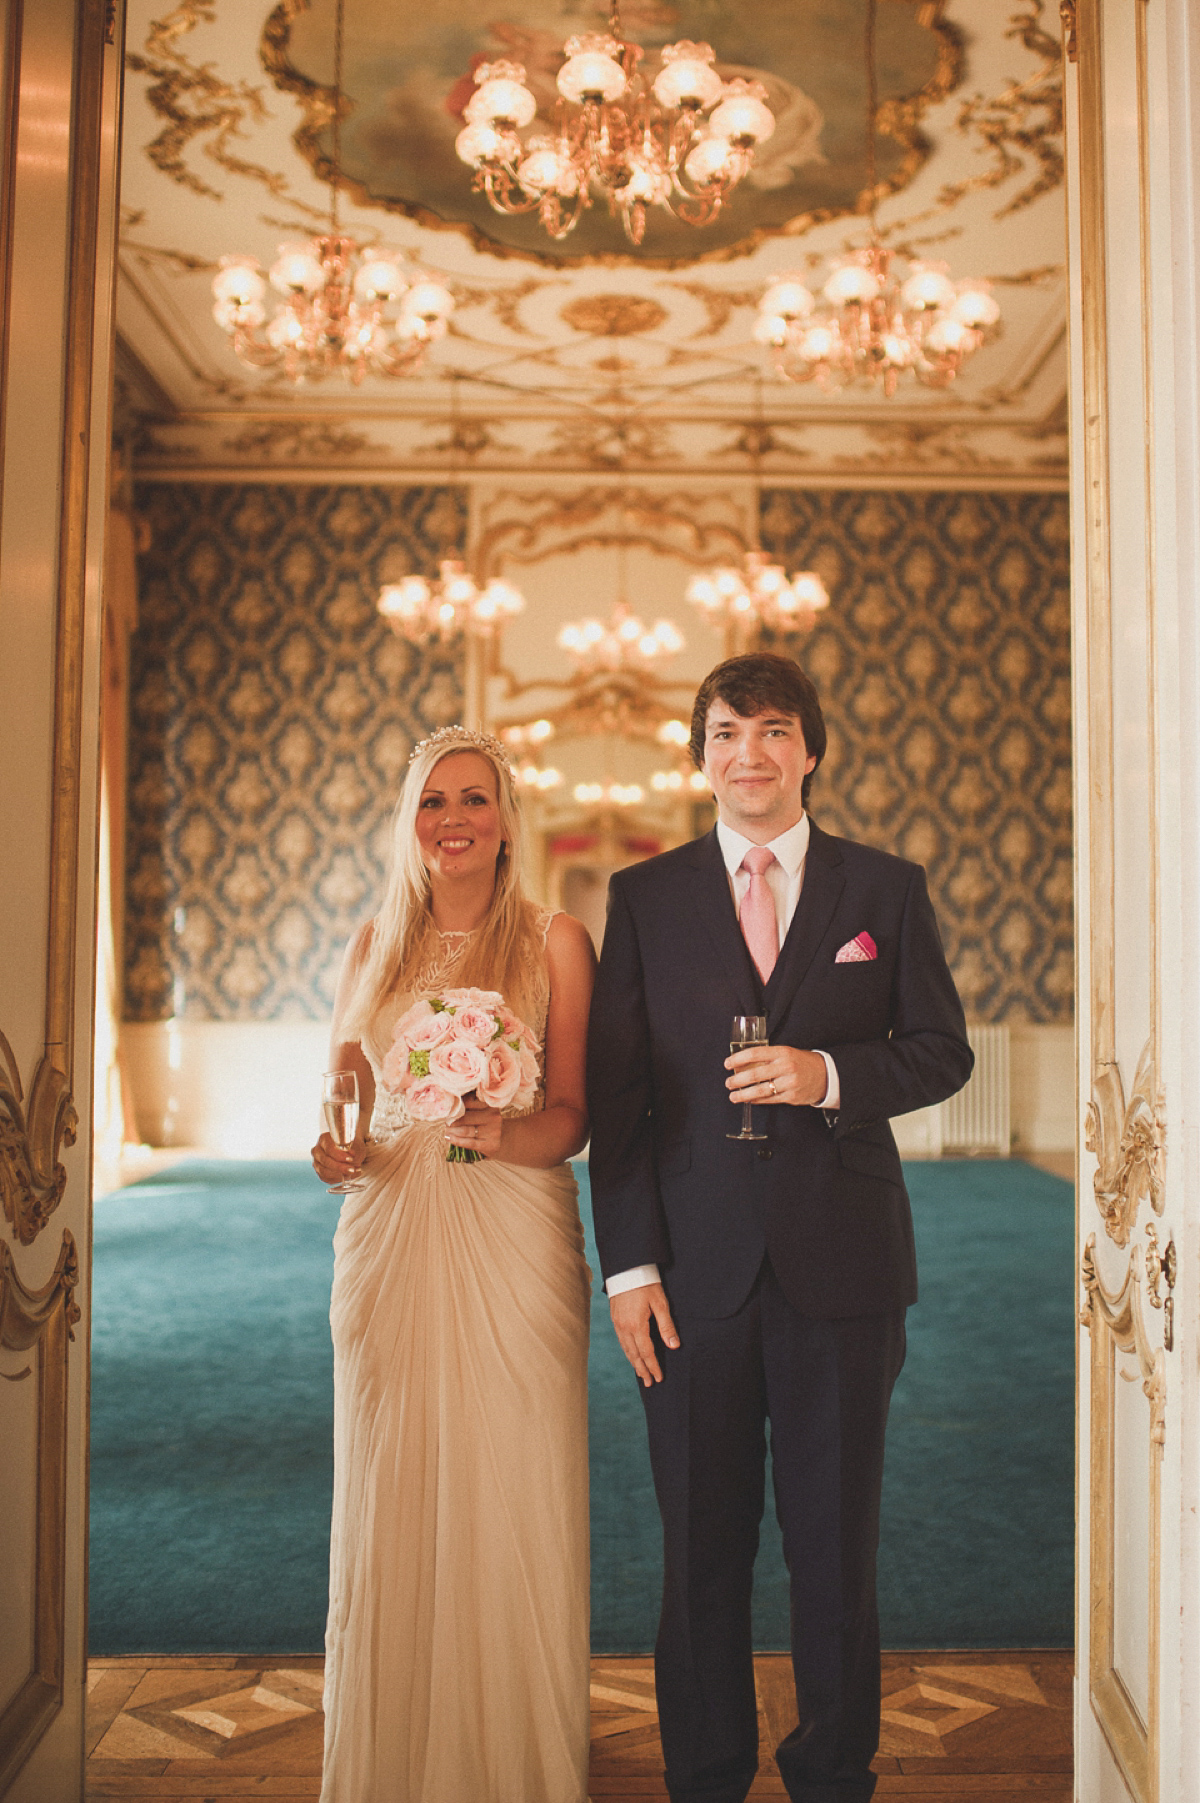 Jannicke wore a gown by Tadashi Shoji, from BHLDN, for her Wrest Park wedding to her husband Luke. Photography by our littlebookforbrides.com member, Matt Penberthy.